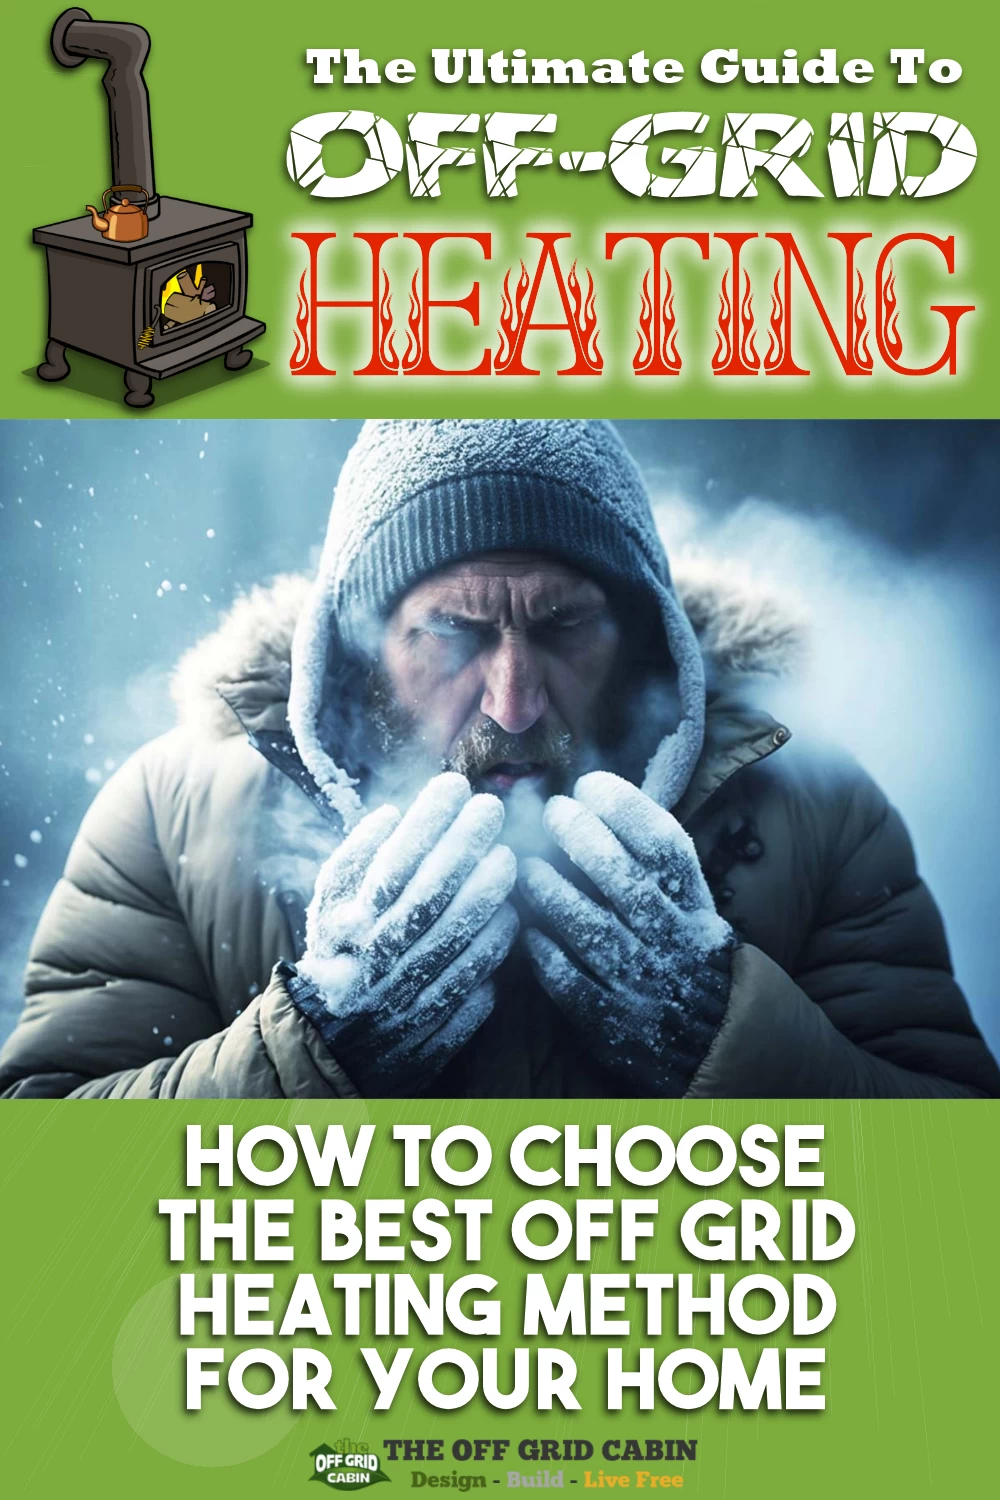 Image of an off grid Man warming up frozen hands with the Title Off Grid Heating